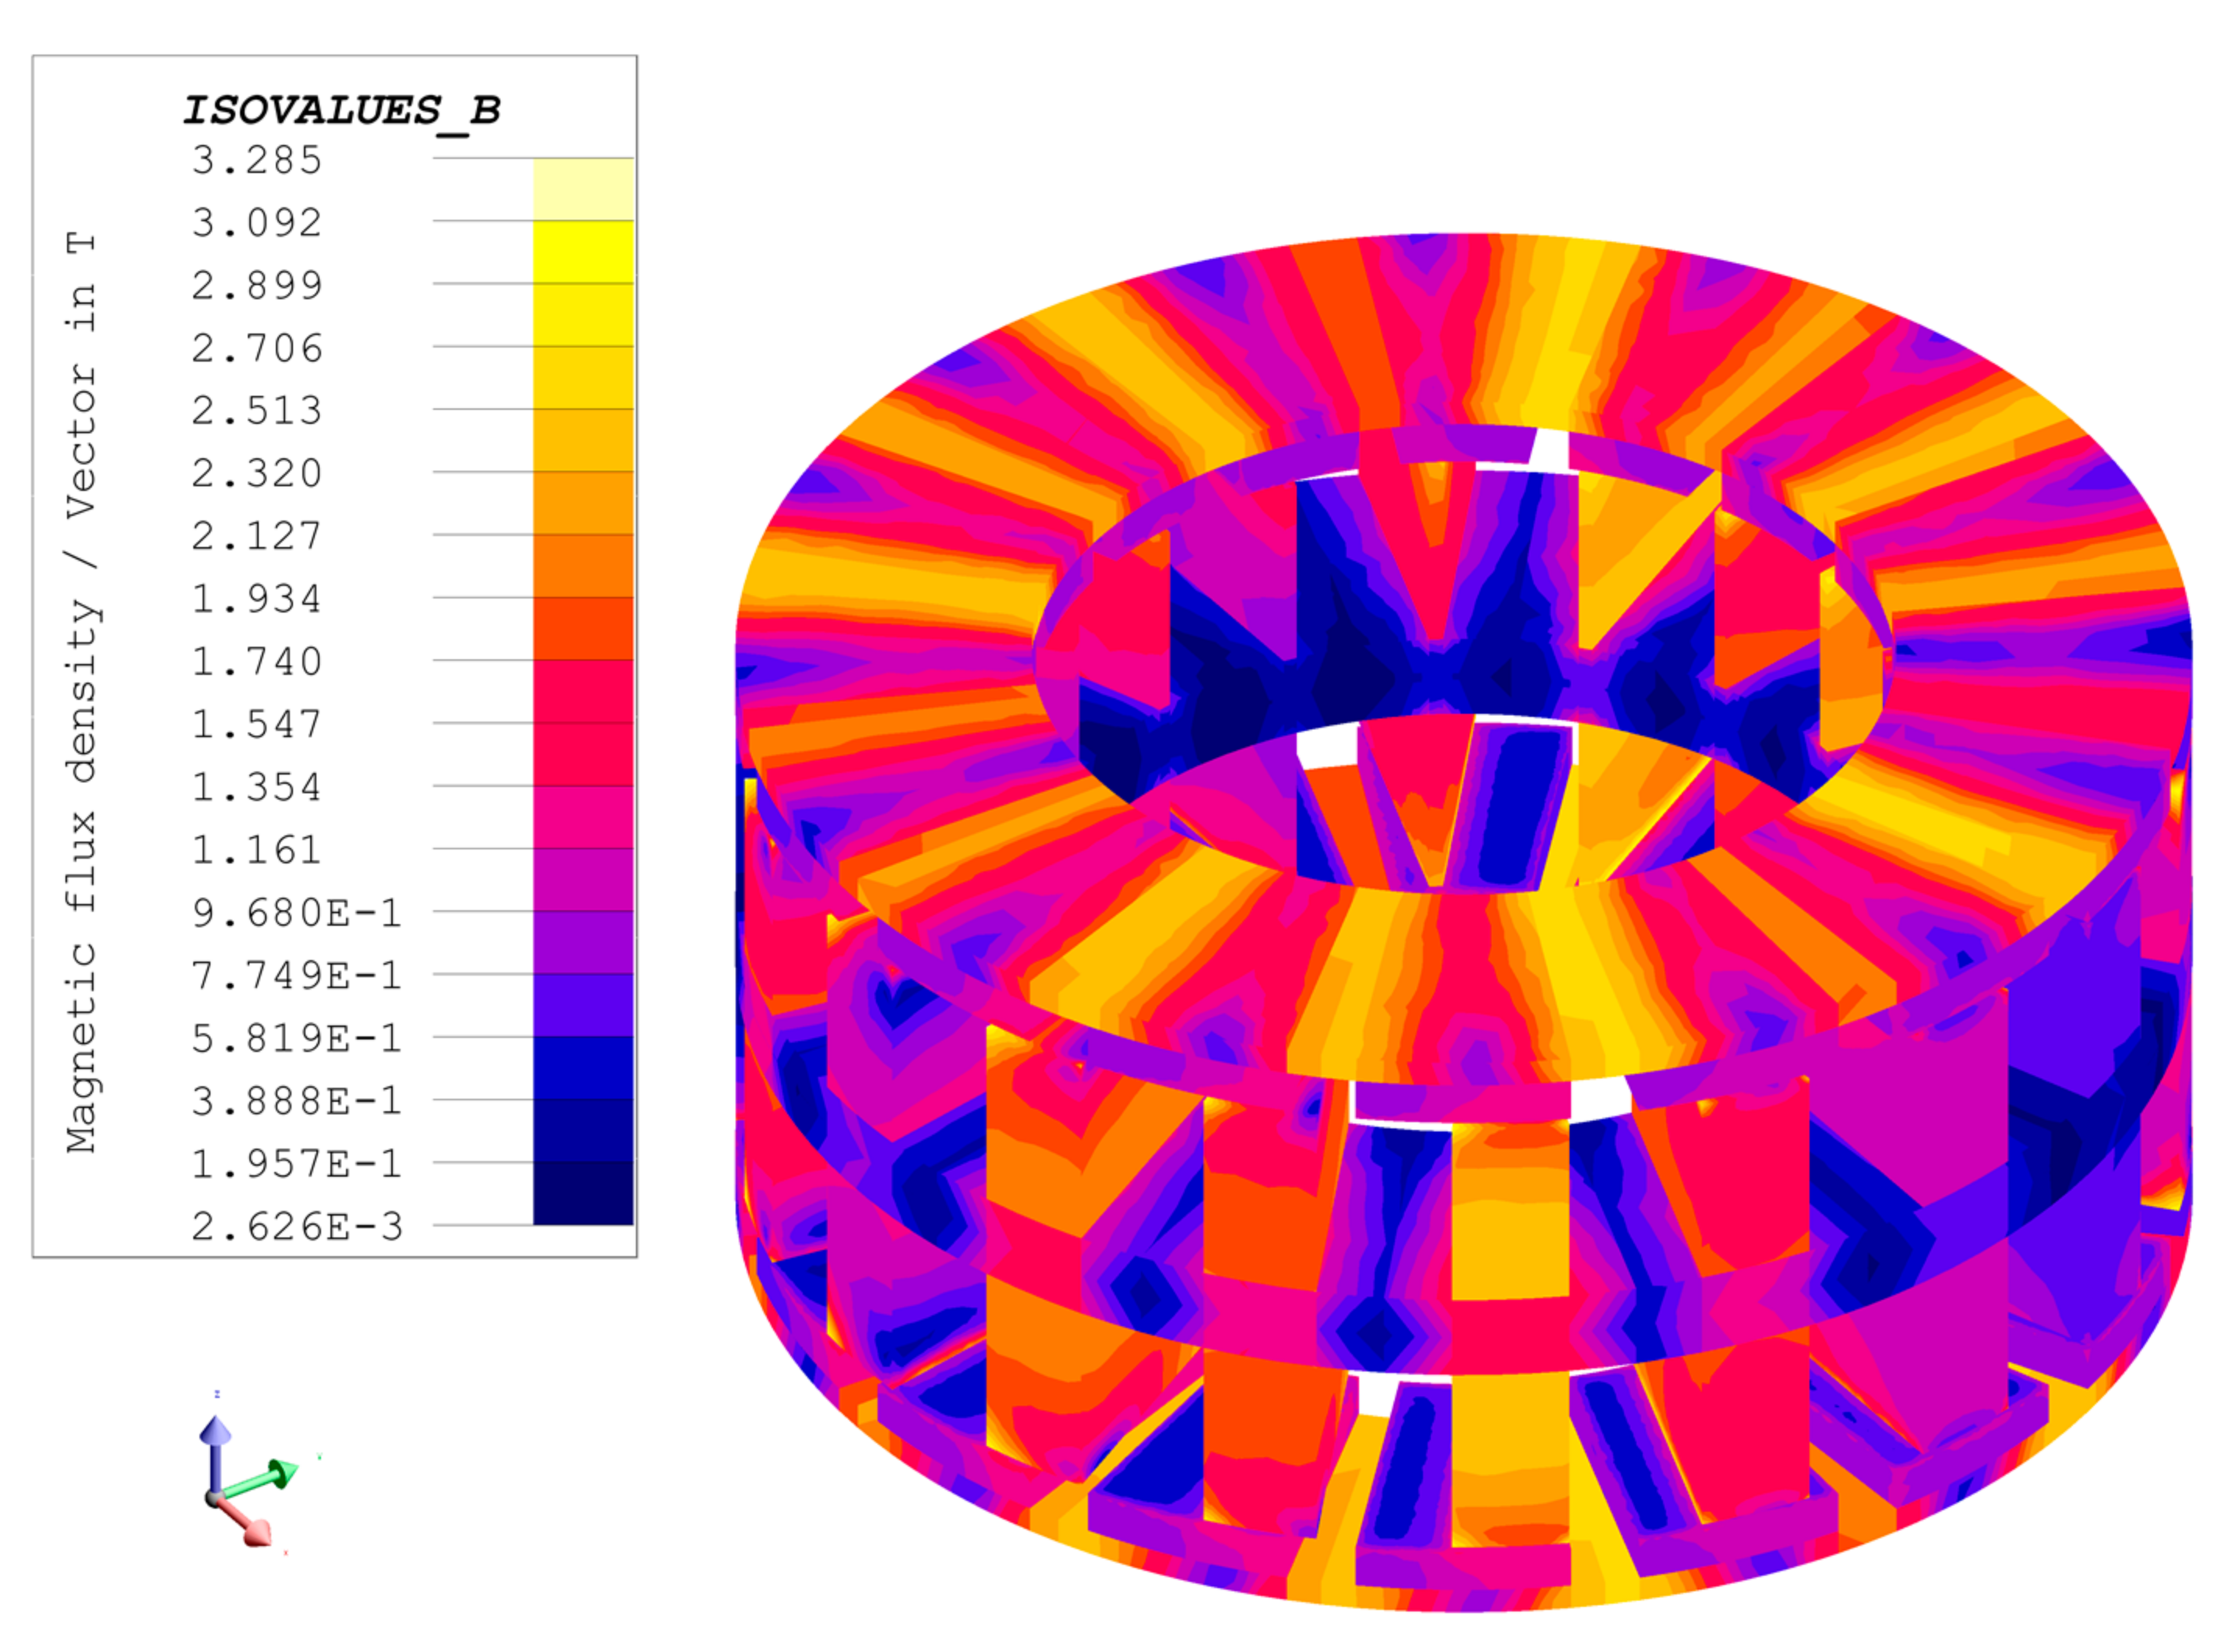 Energies | Free Full-Text | Axial Flux PM In-Wheel Motor for Electric Vehicles: Multiphysics Analysis